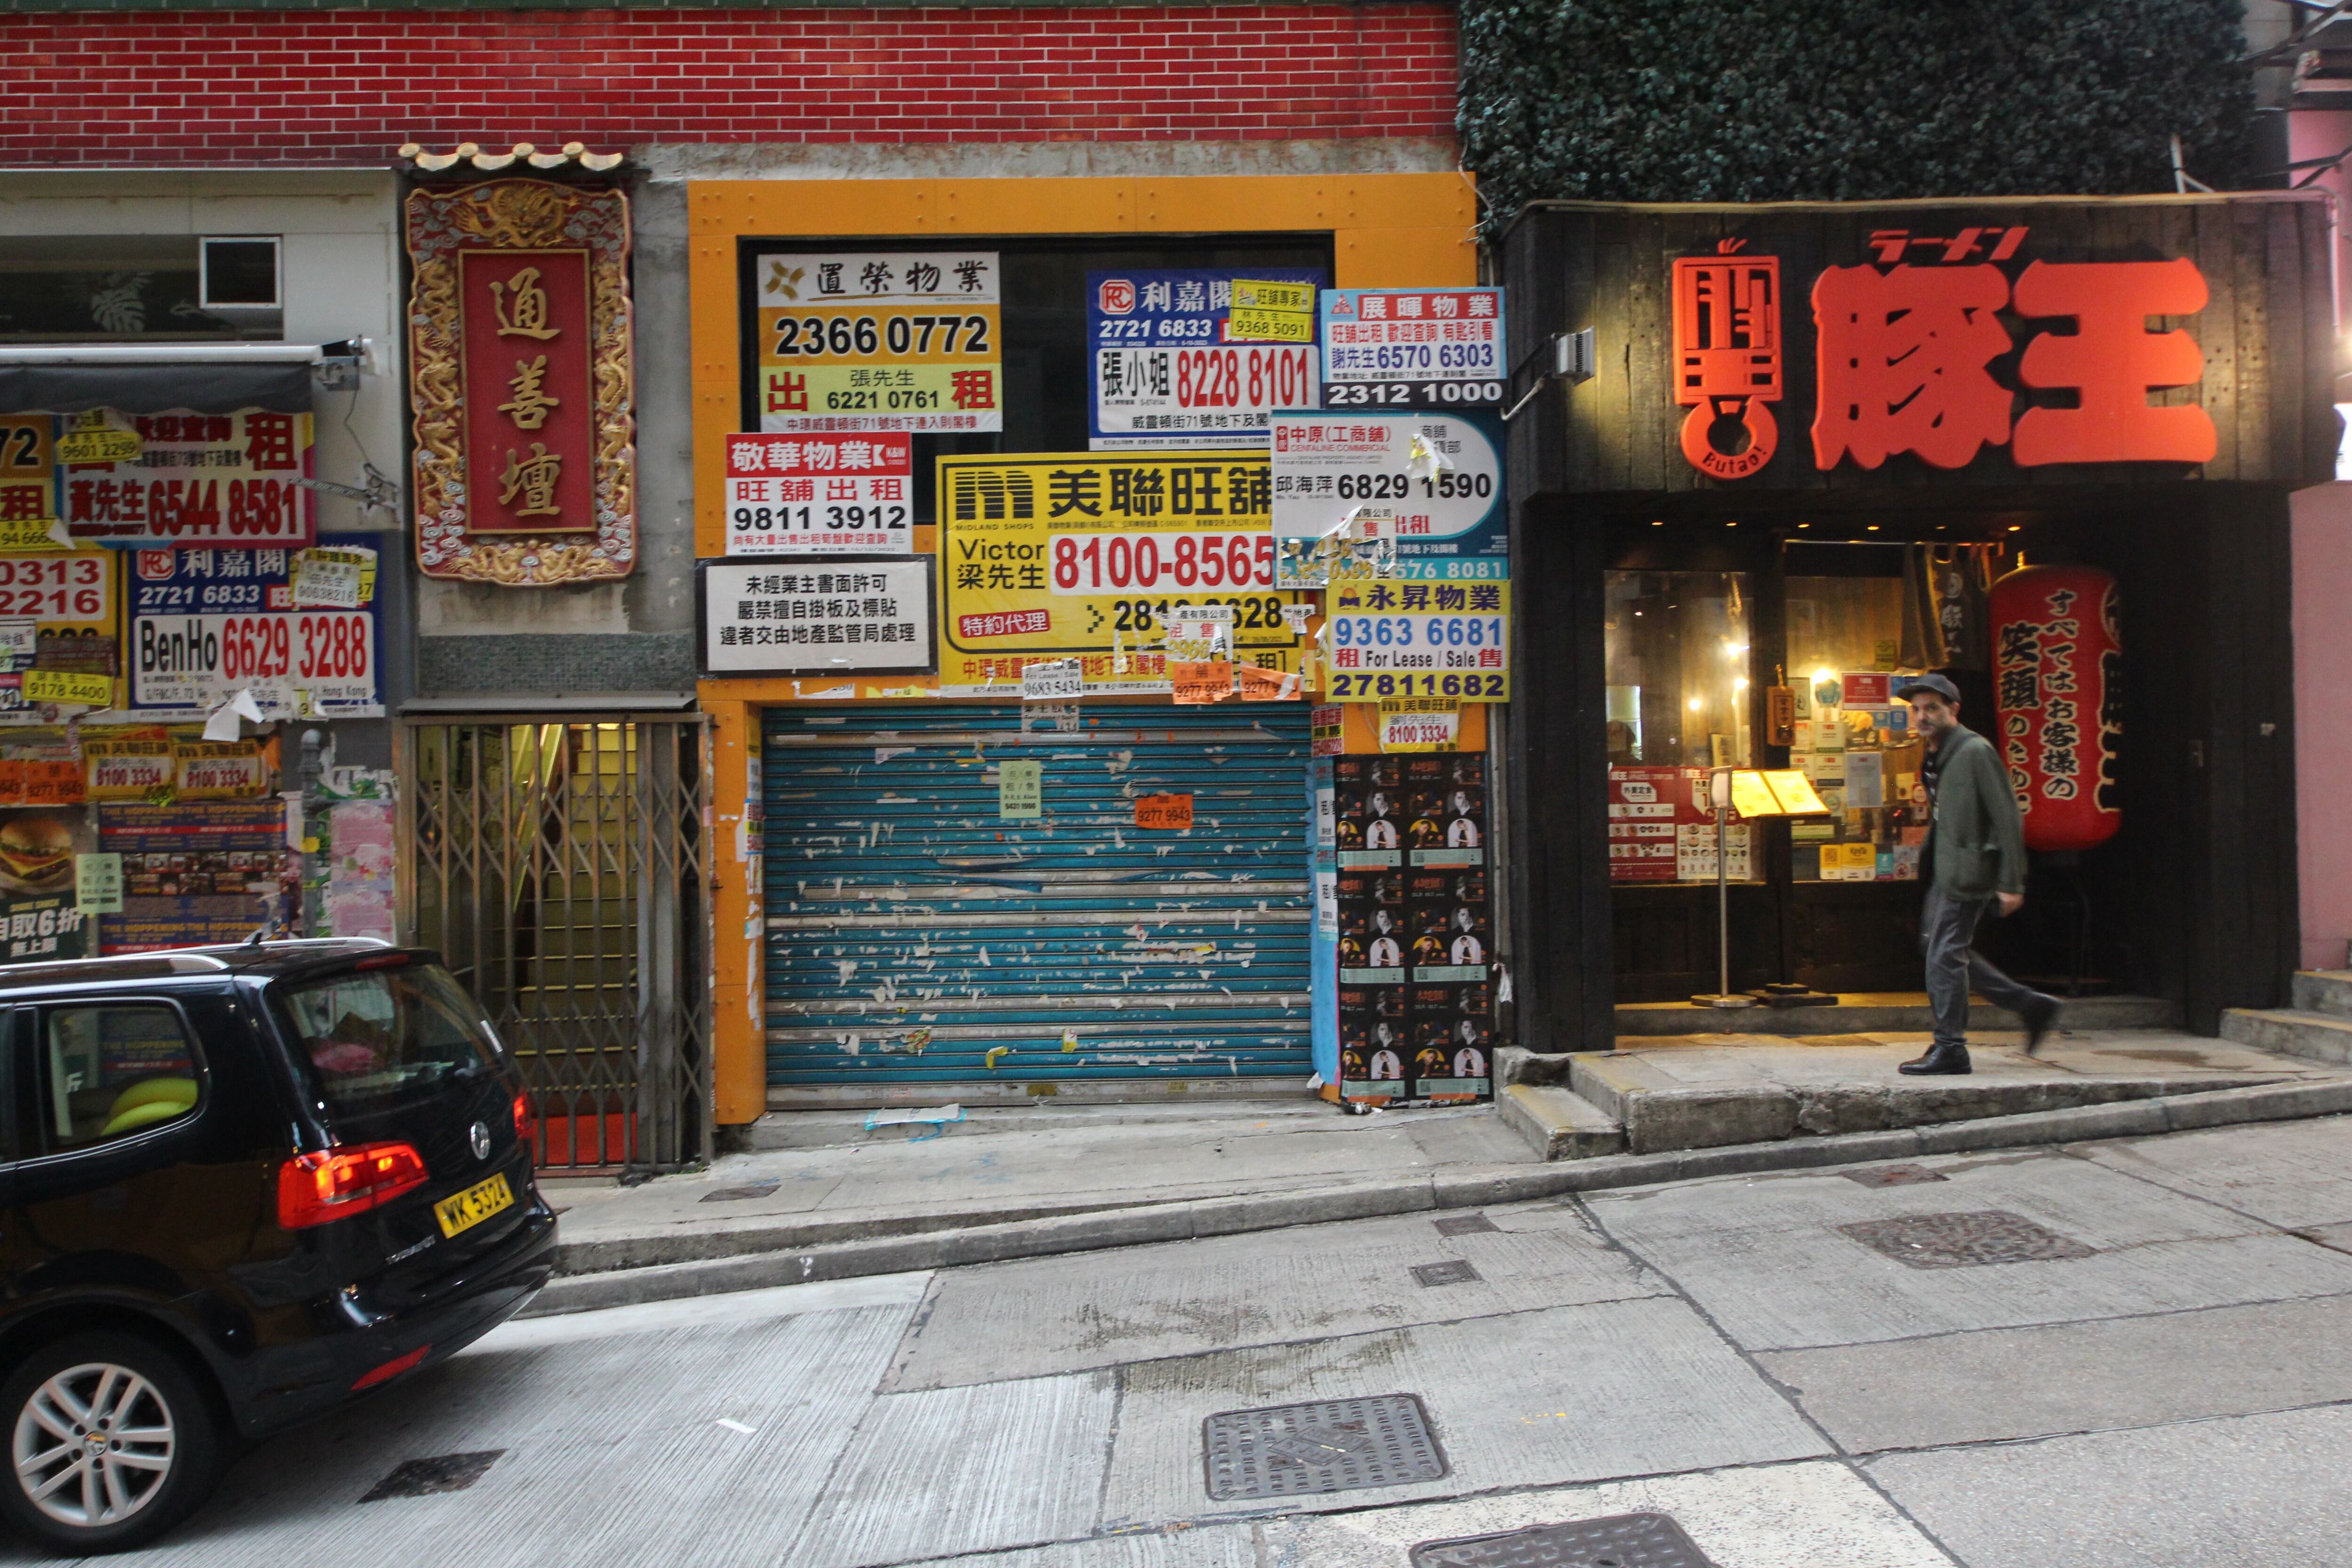 The Bored and Hungry crypto OTC shop in Hong Kong's Central district was shut down during the JPEX investigation. Photocredit: Callan Quinn/ DL News